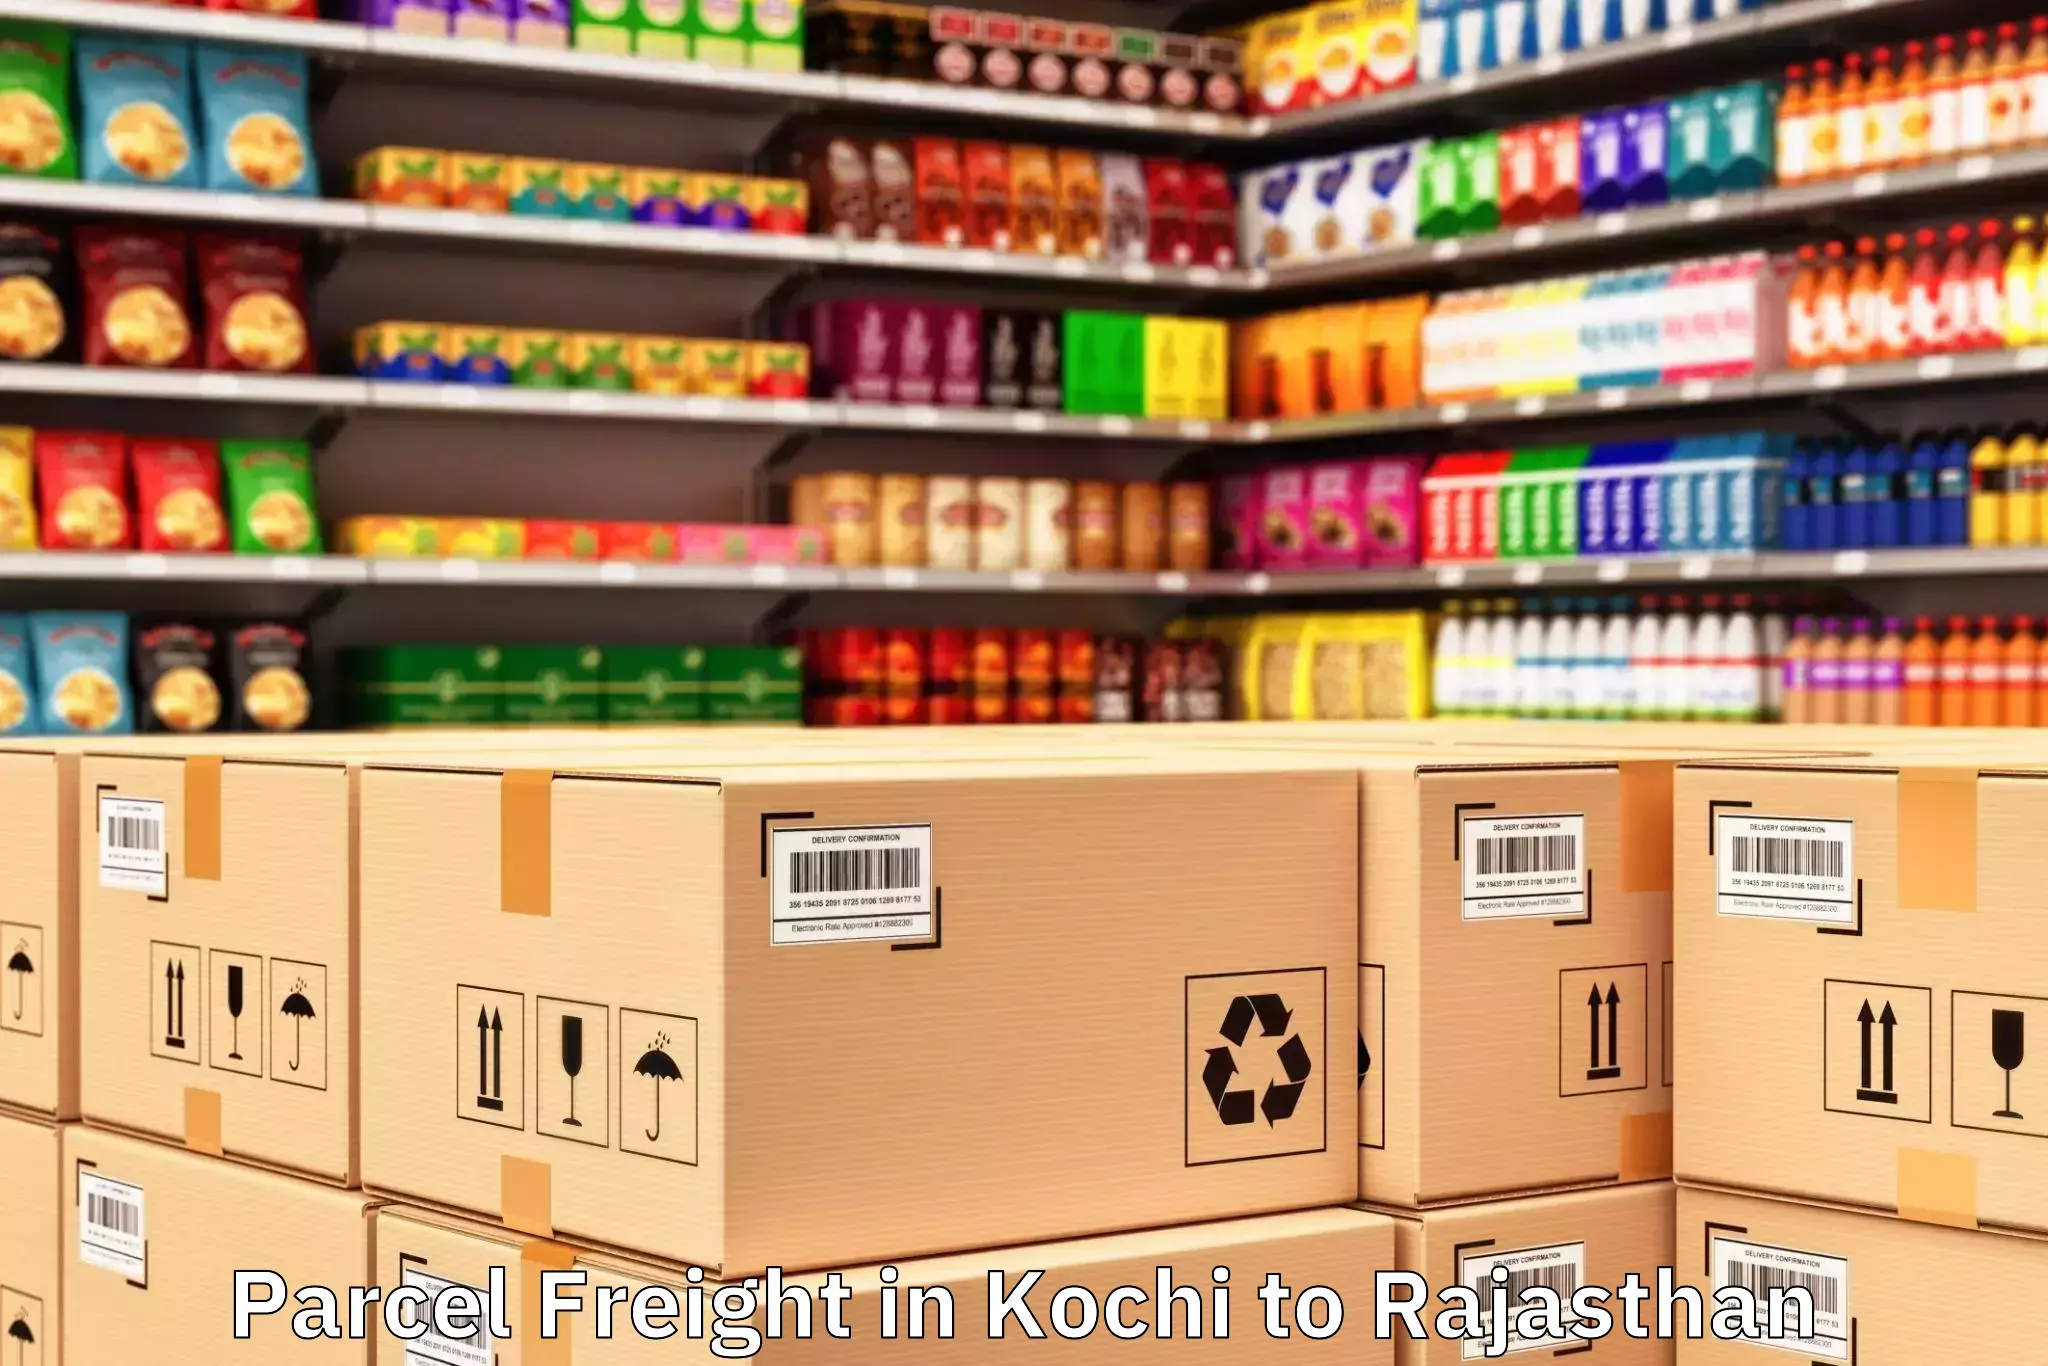 Easy Kochi to Rajasthan Parcel Freight Booking